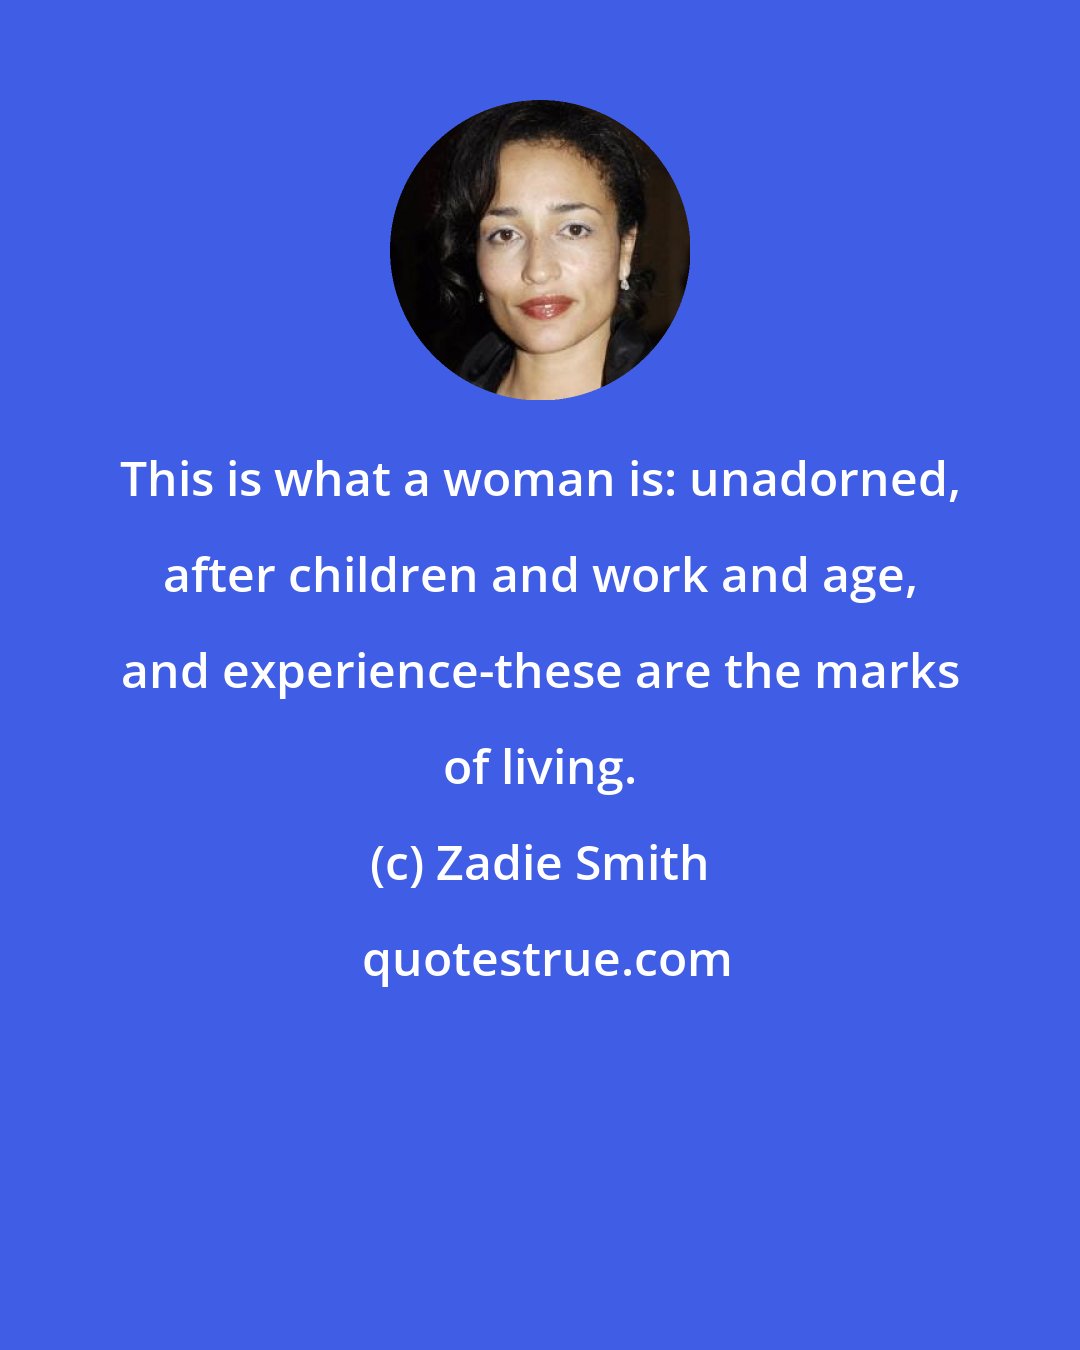 Zadie Smith: This is what a woman is: unadorned, after children and work and age, and experience-these are the marks of living.